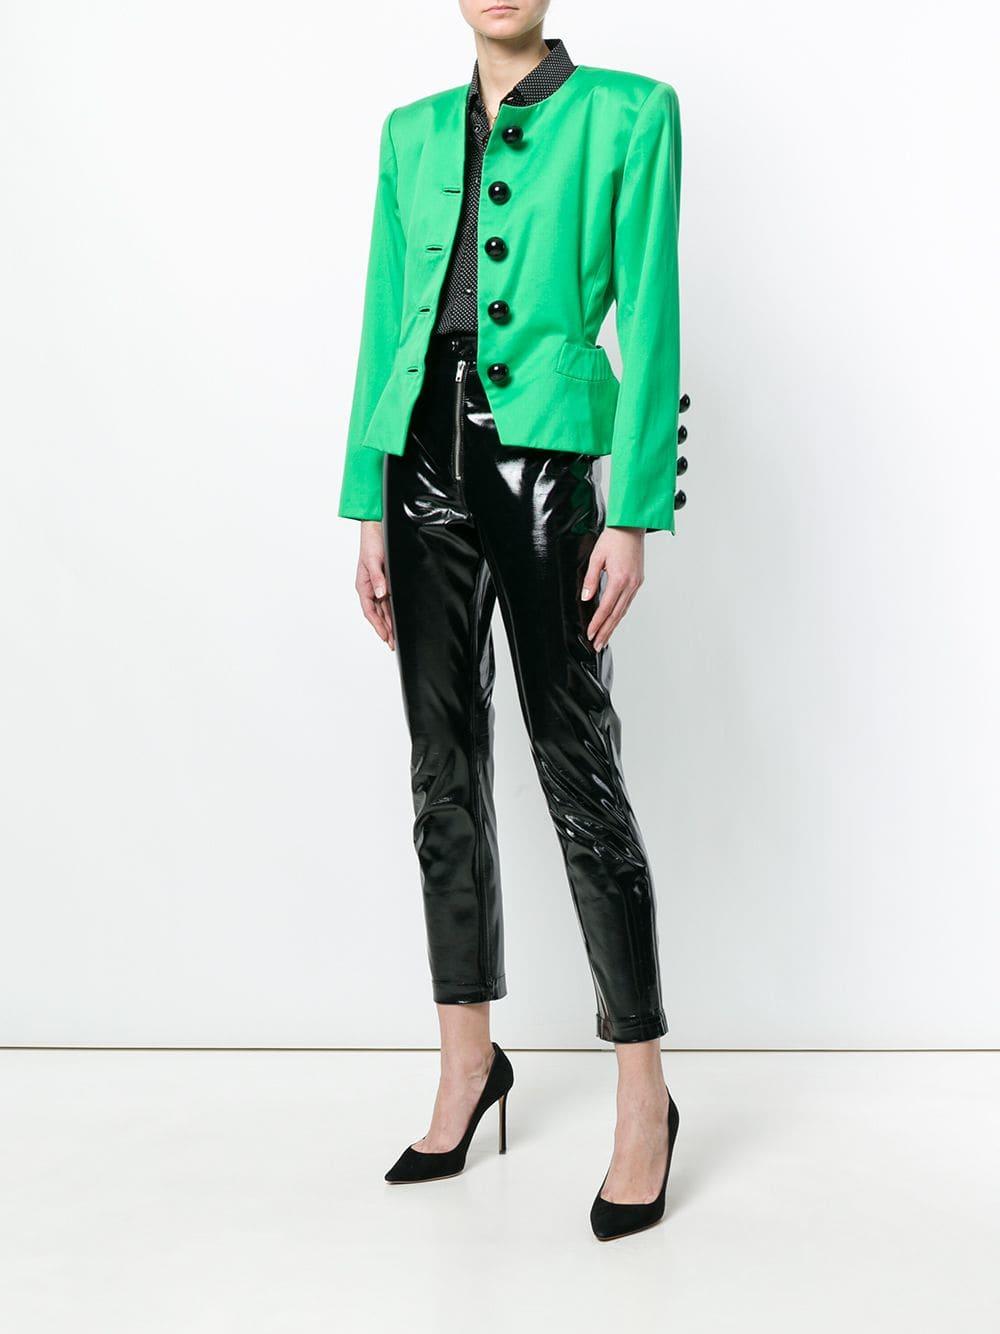 Yves Saint Laurent eye-catching bright pea green silk and cotton crewneck slim fit jacket, with long sleeves, black plastic oversized buttons front fastening and buttoned cuffs. Two curved design welt pockets. Lined in green fabric, with black edges